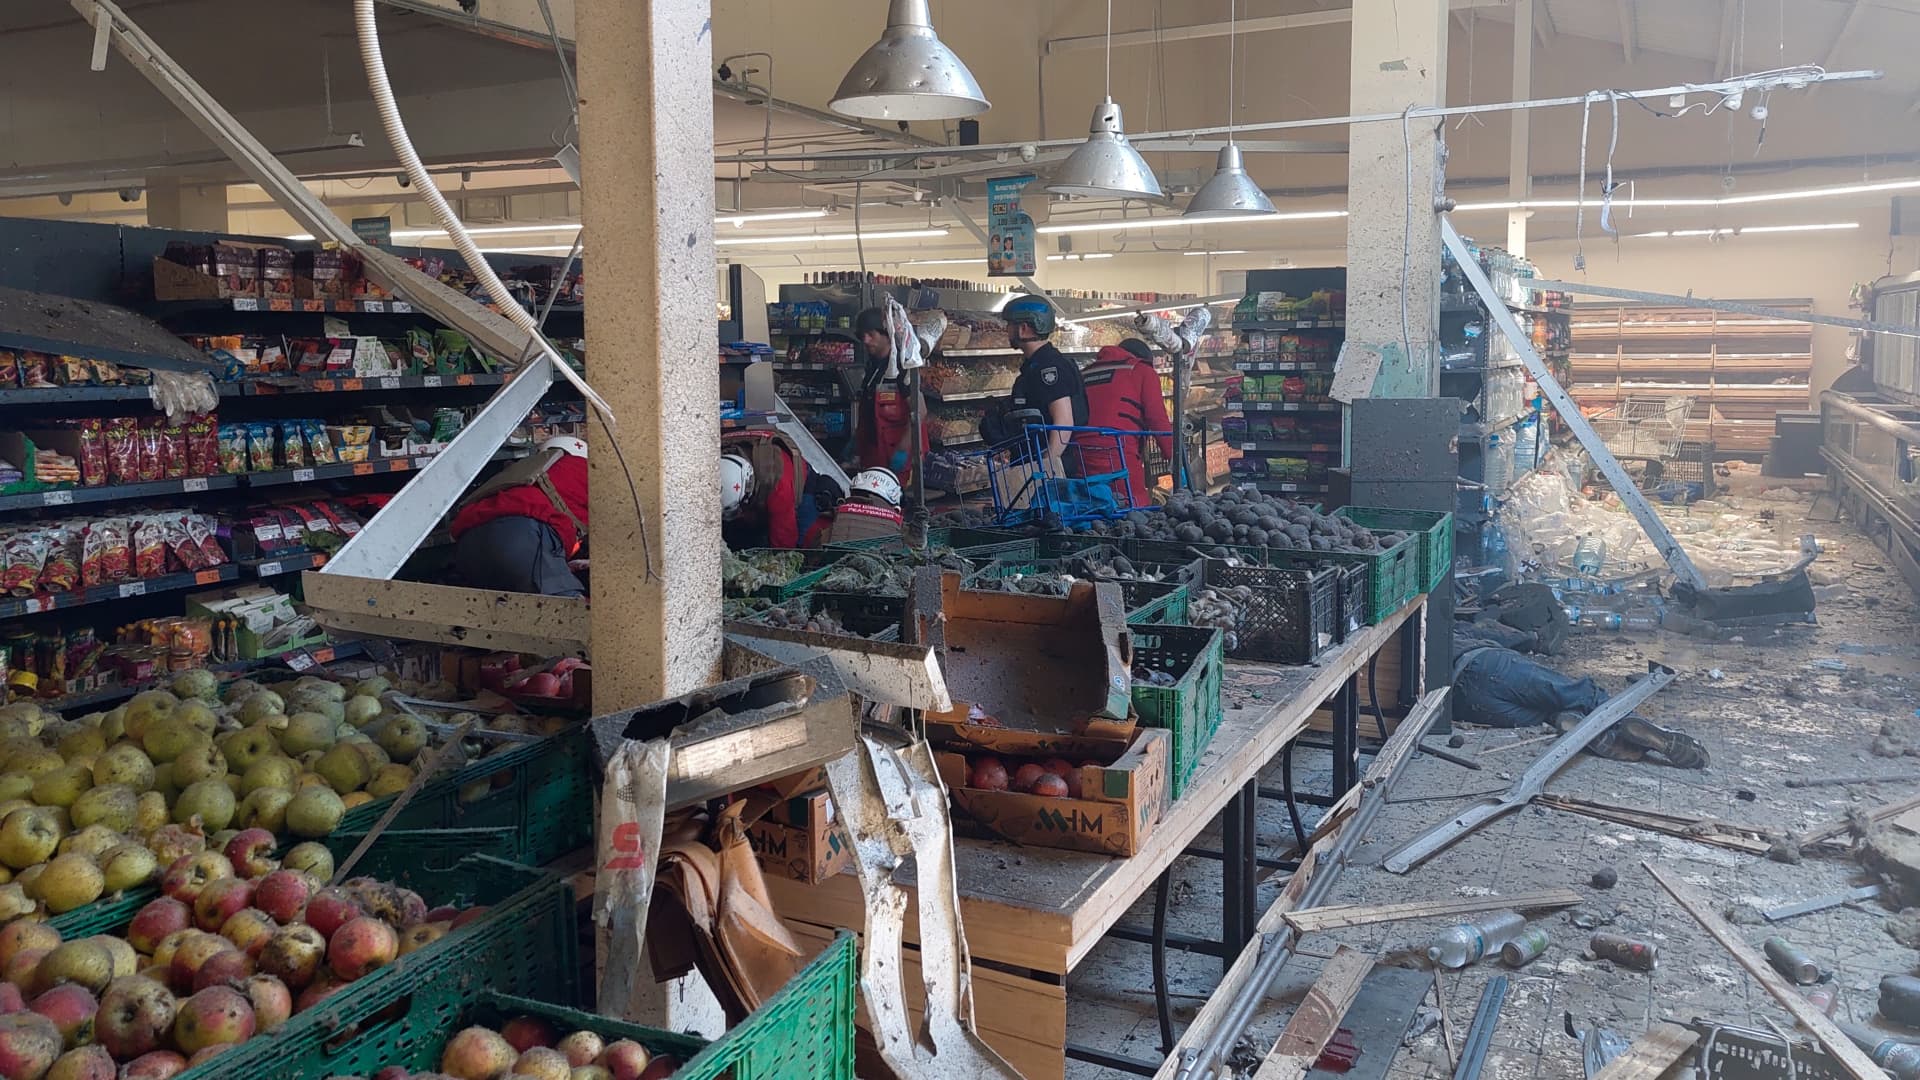 EDITORS NOTE: Graphic content / Policemen stand next to the bodies of local residents covered with a blanket in front of a damaged hypermarket in the southern Ukrainian city of Kherson, amid the Russian invasion of Ukraine.